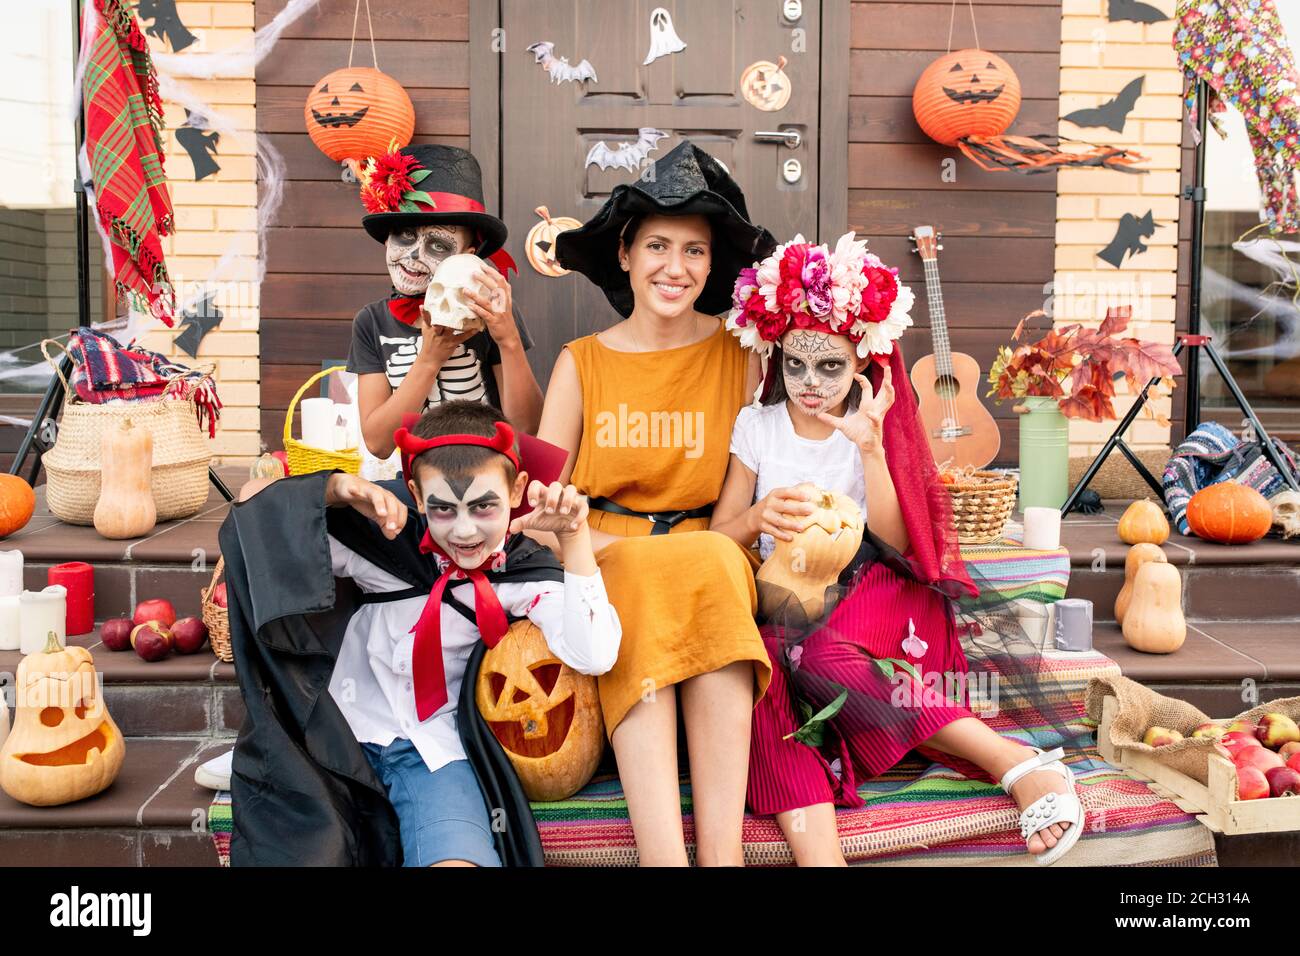 Young cheerful woman sitting on staircase among spooky halloween kids Stock Photo